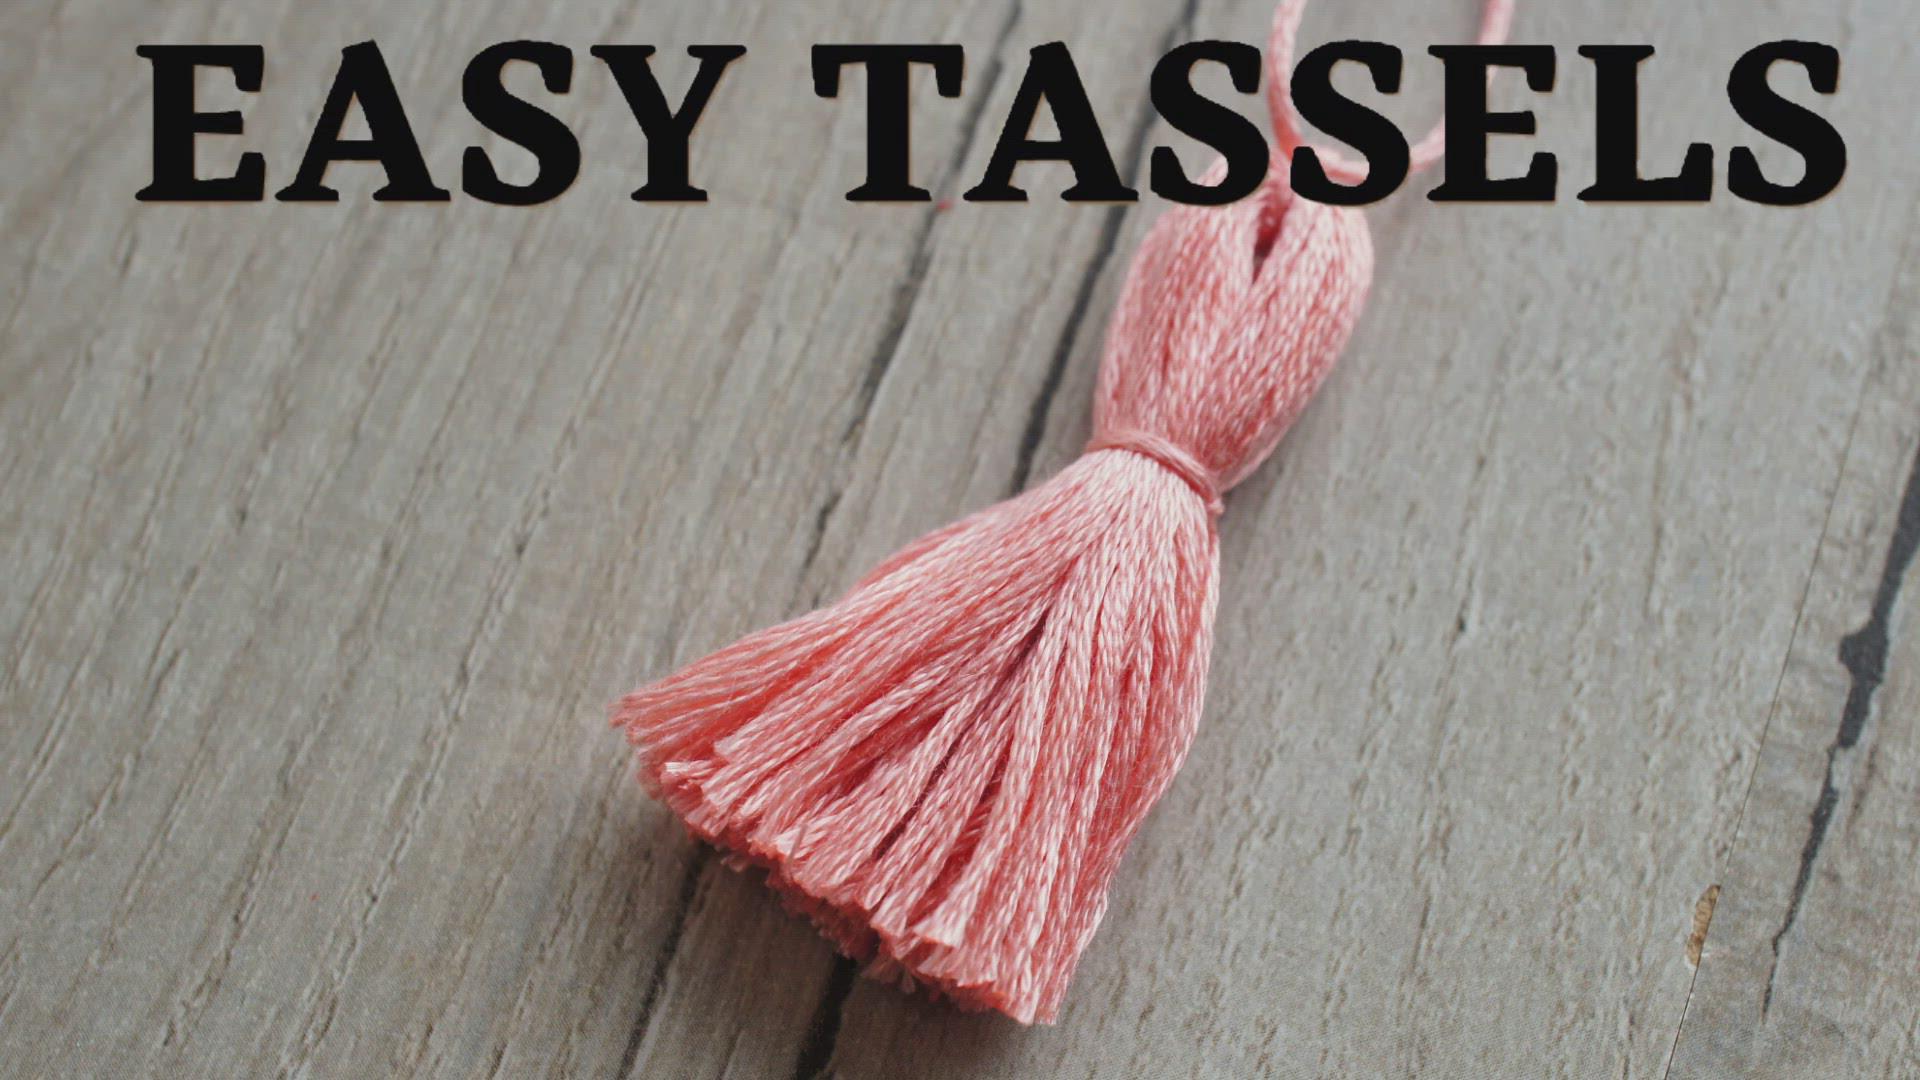 'Video thumbnail for How to make Tassels Easily from Yarn or Embroidery thread'